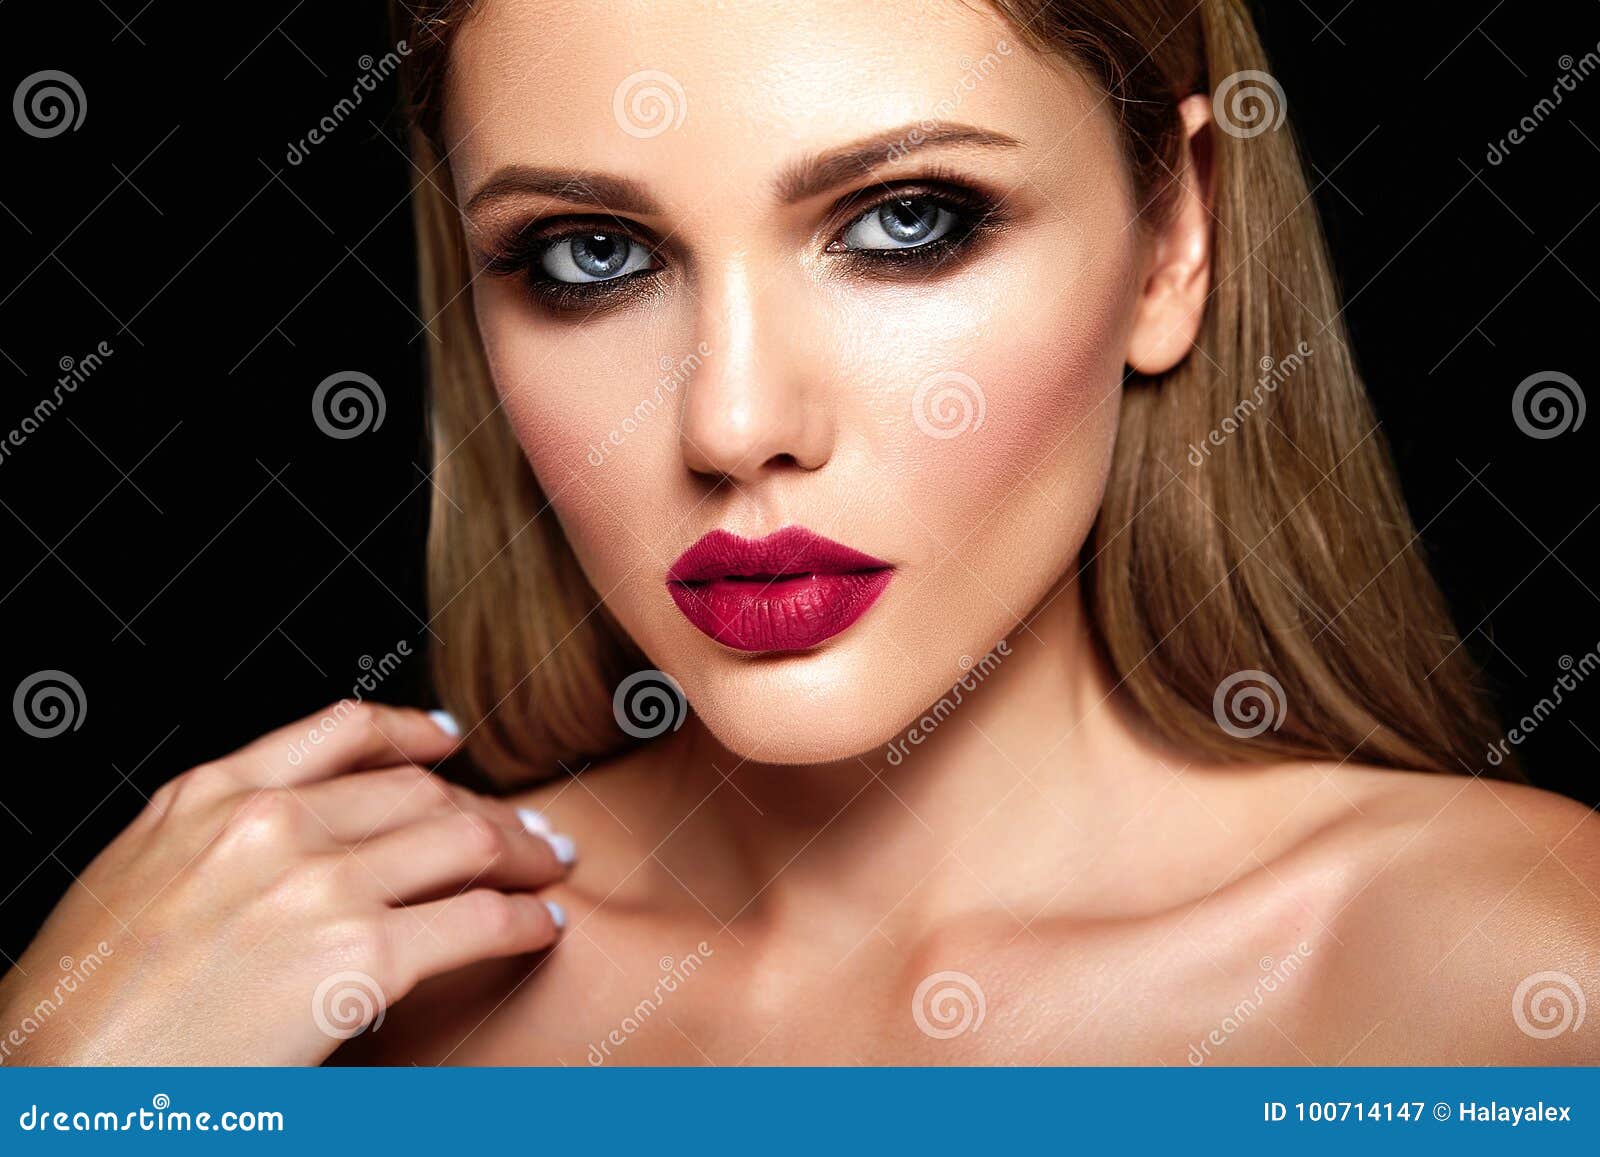 Portrait Of Beautiful Woman Model With Makeup And Clean Healthy Skin Stock Image Image Of